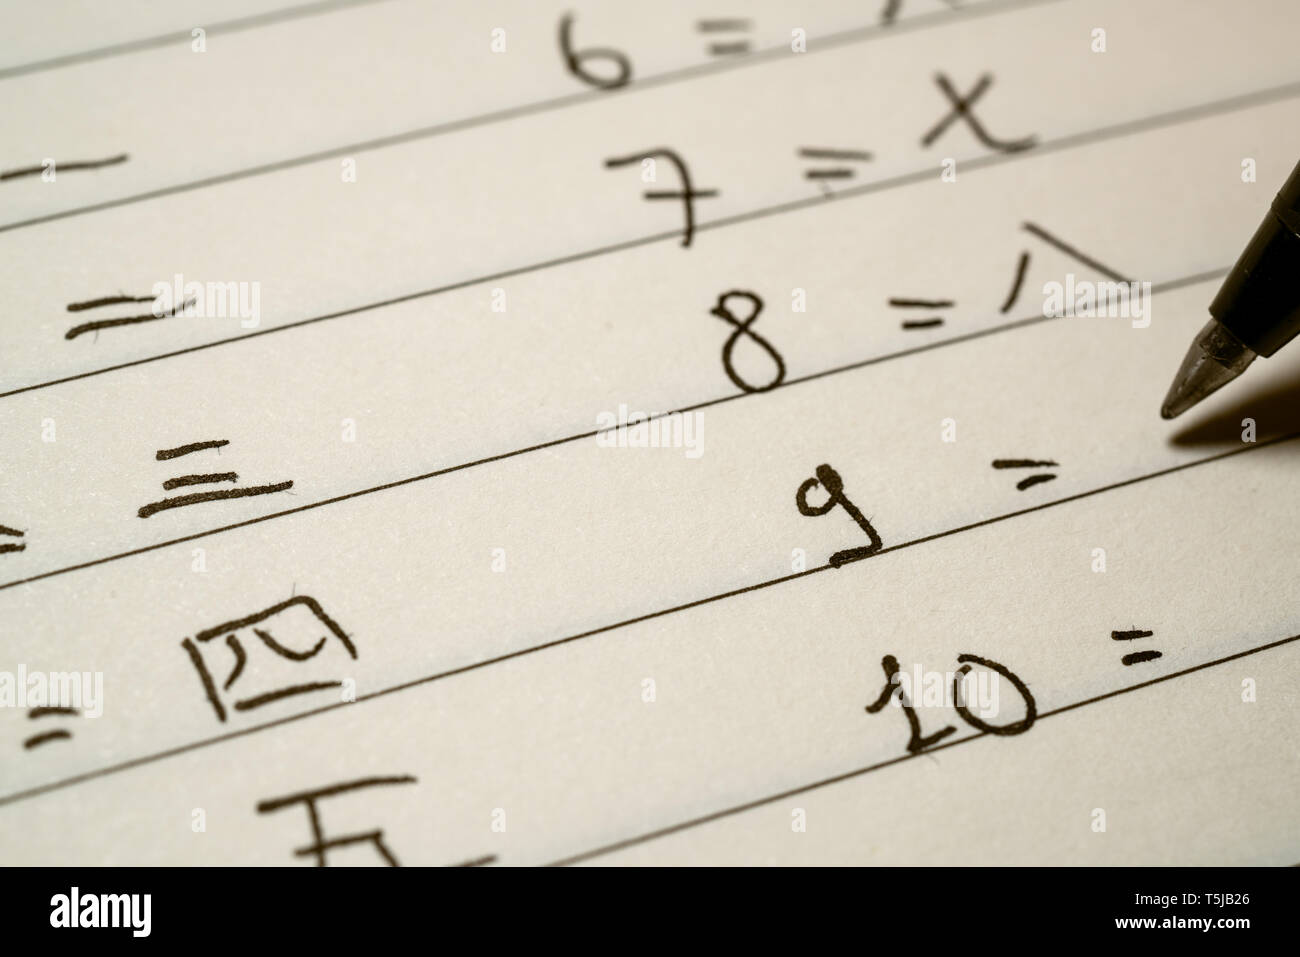 Beginner Chinese language learner writing numbers in Chinese characters macro shot Stock Photo